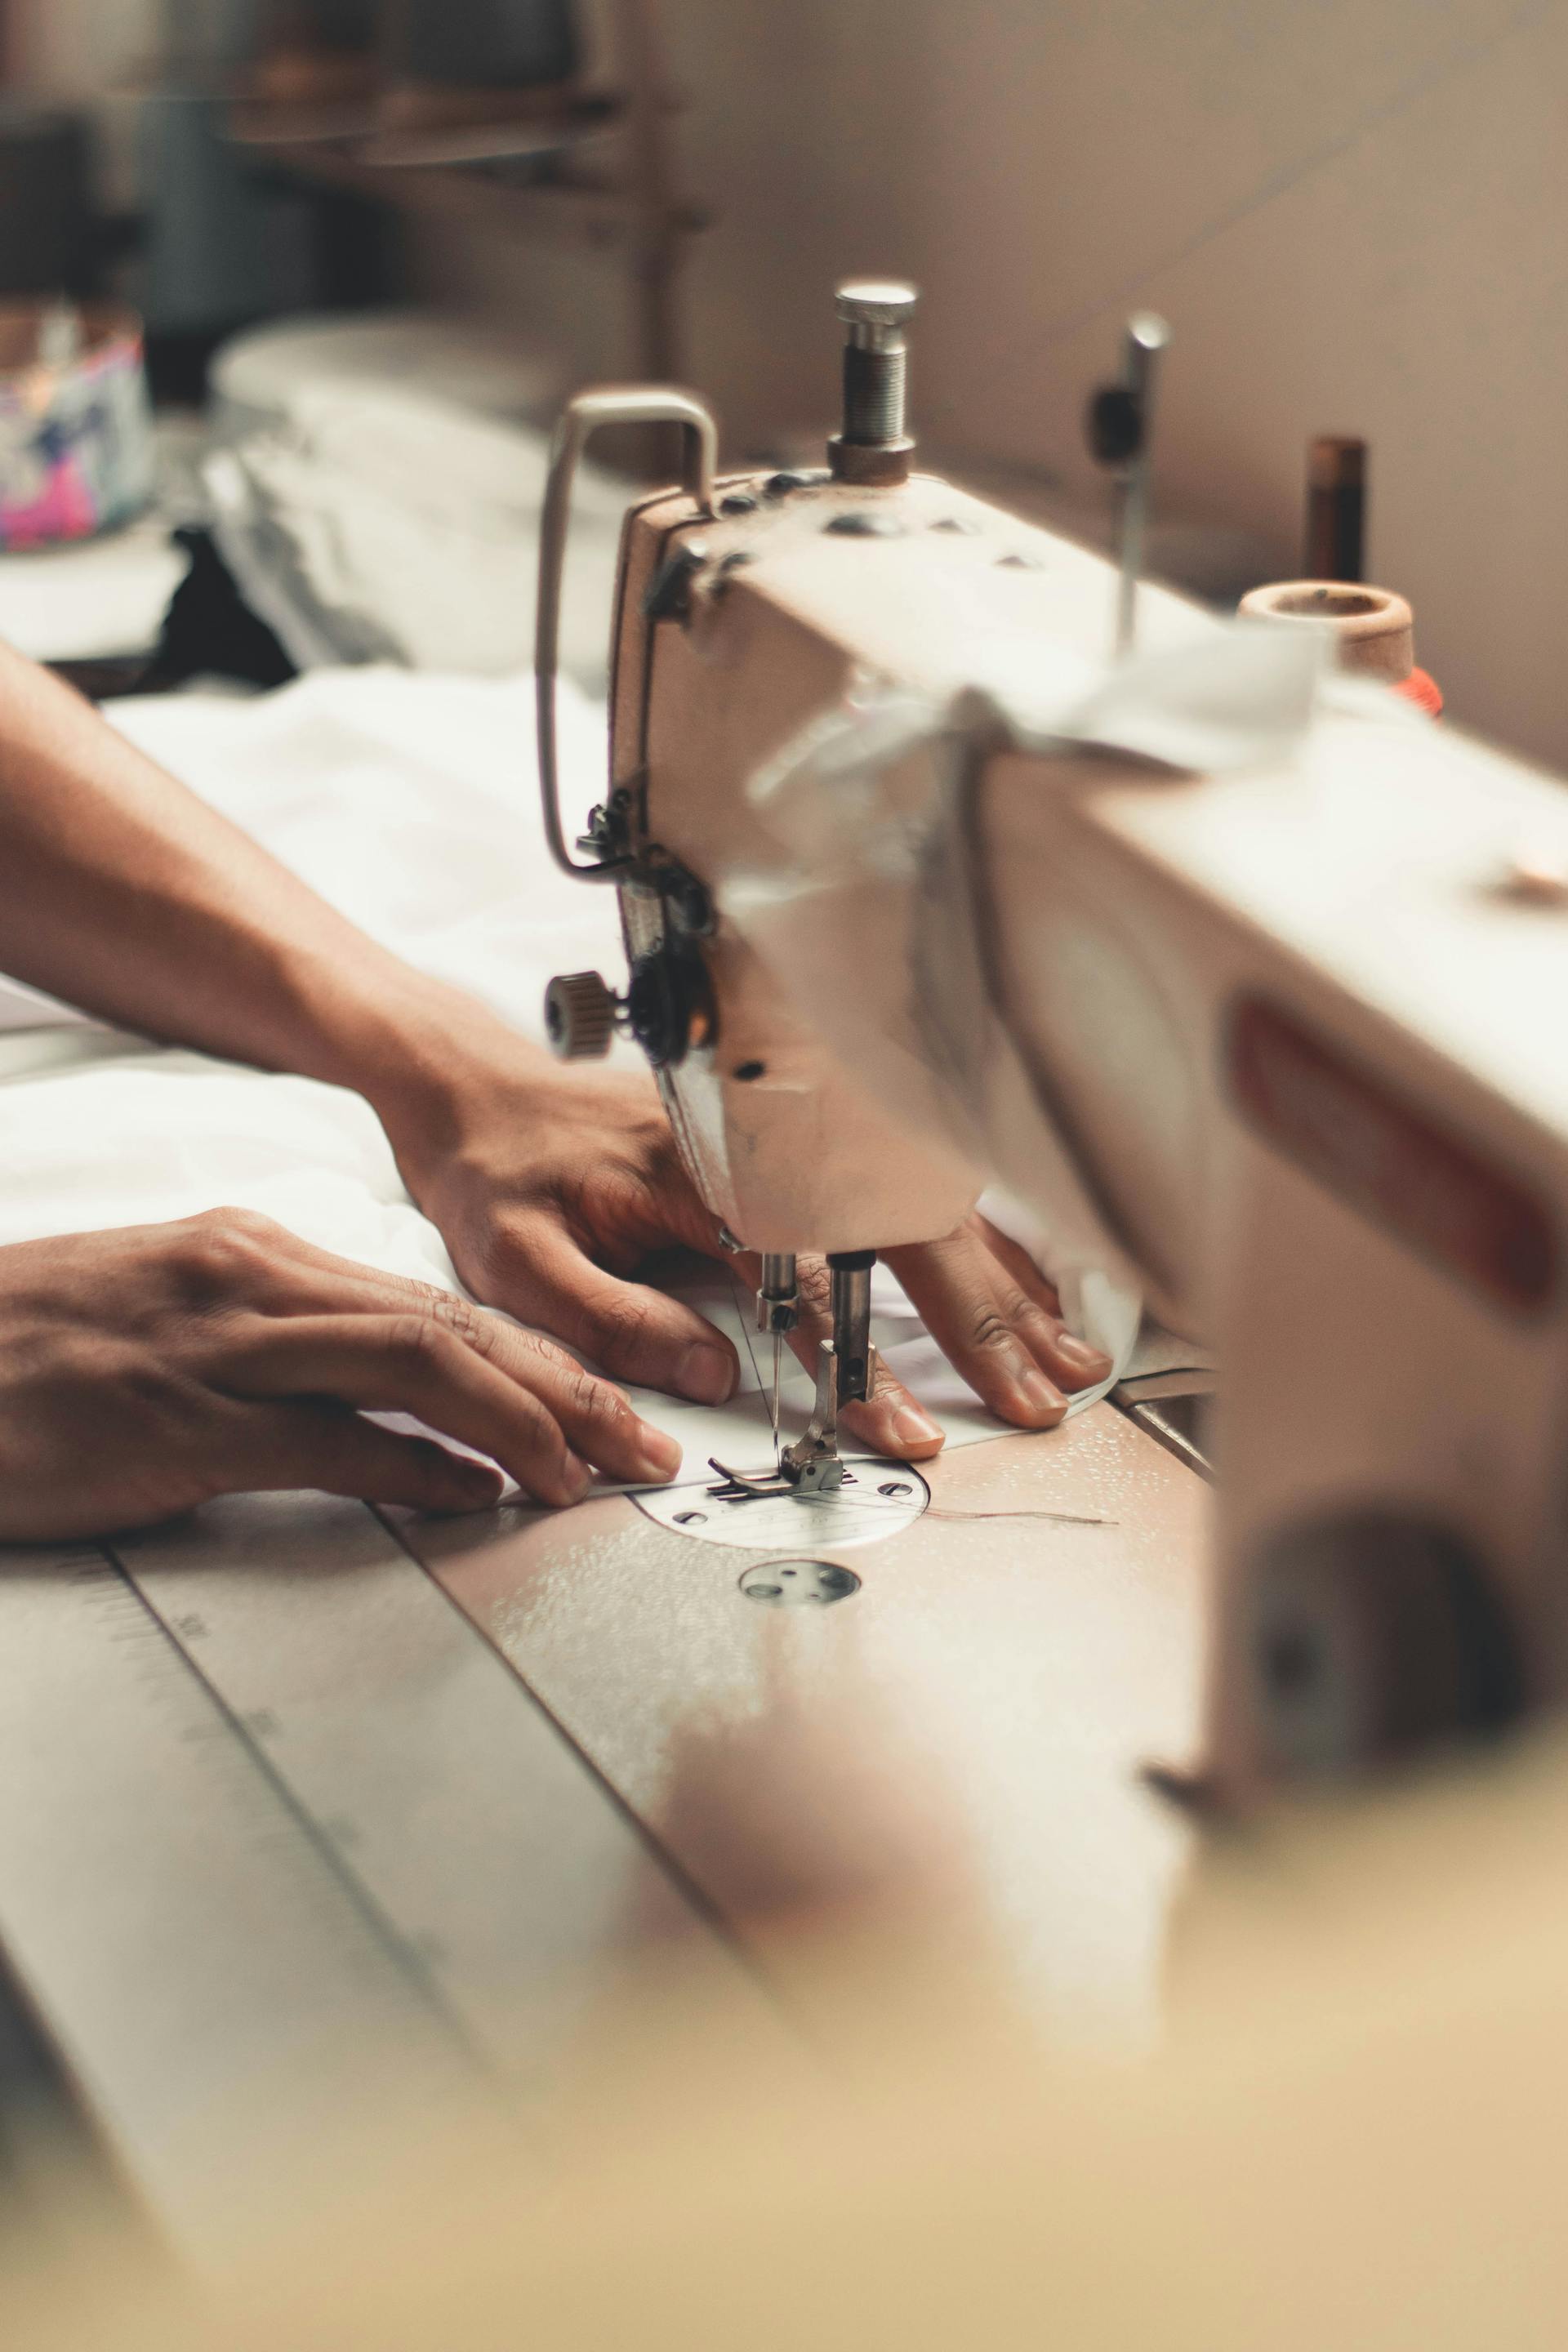 A person using a sewing machine | Source: Pexels